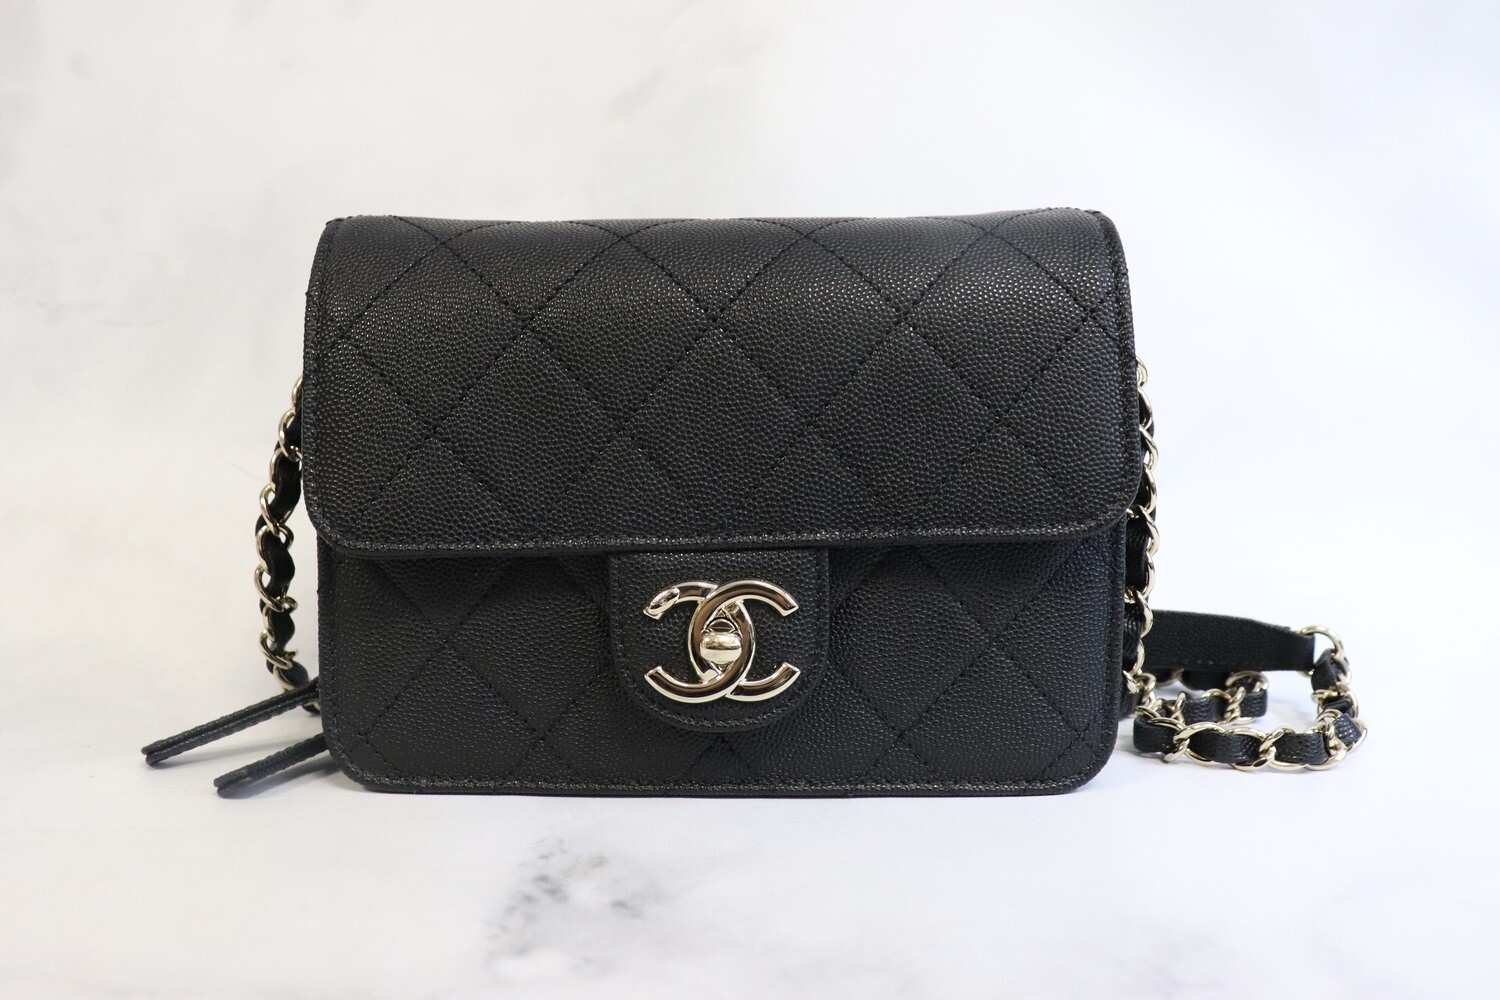 Chanel Like A Wallet XS, Black Caviar Leather, Gold Hardware, Like New in  Box